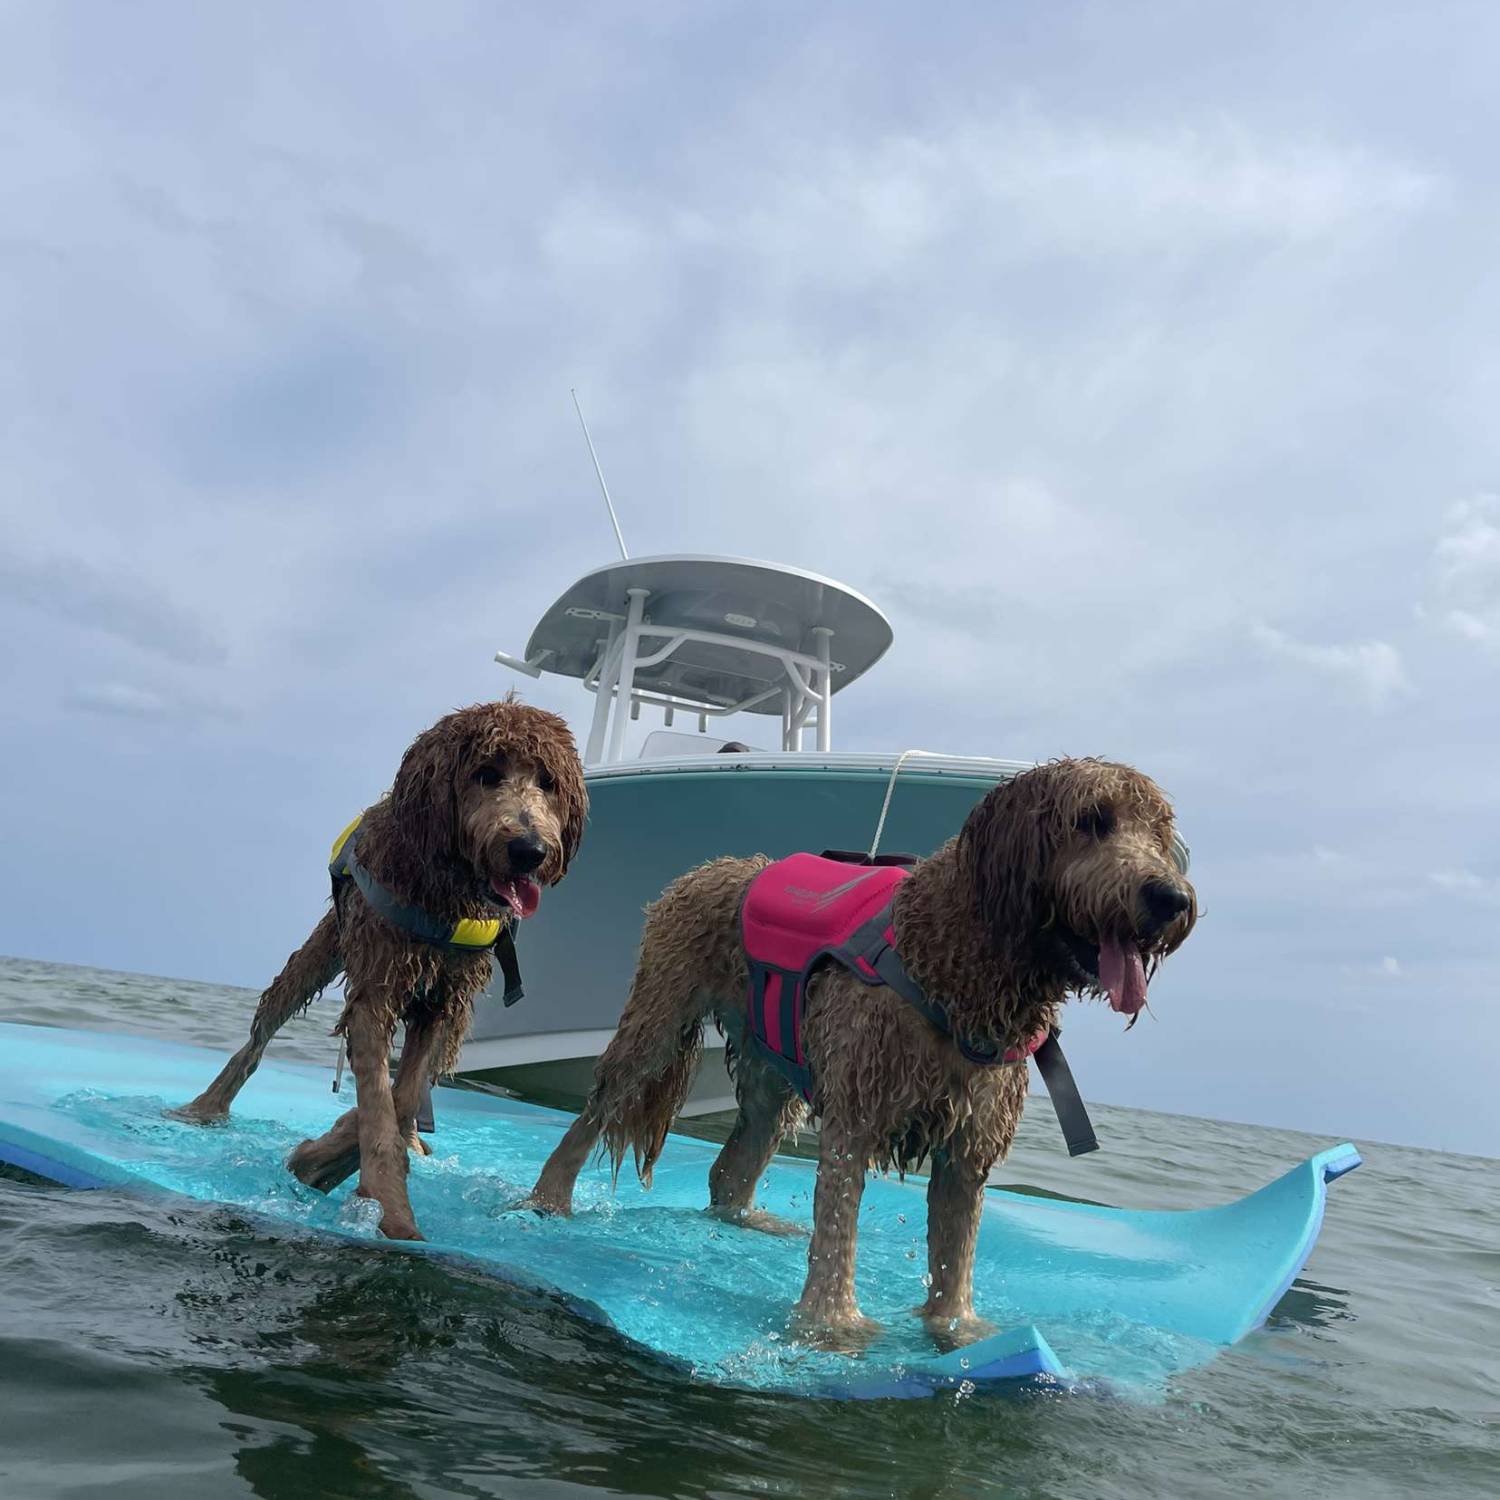 Dixie and Daisy our golden doodles on vacation in the Keys at a sandbar living their best life.